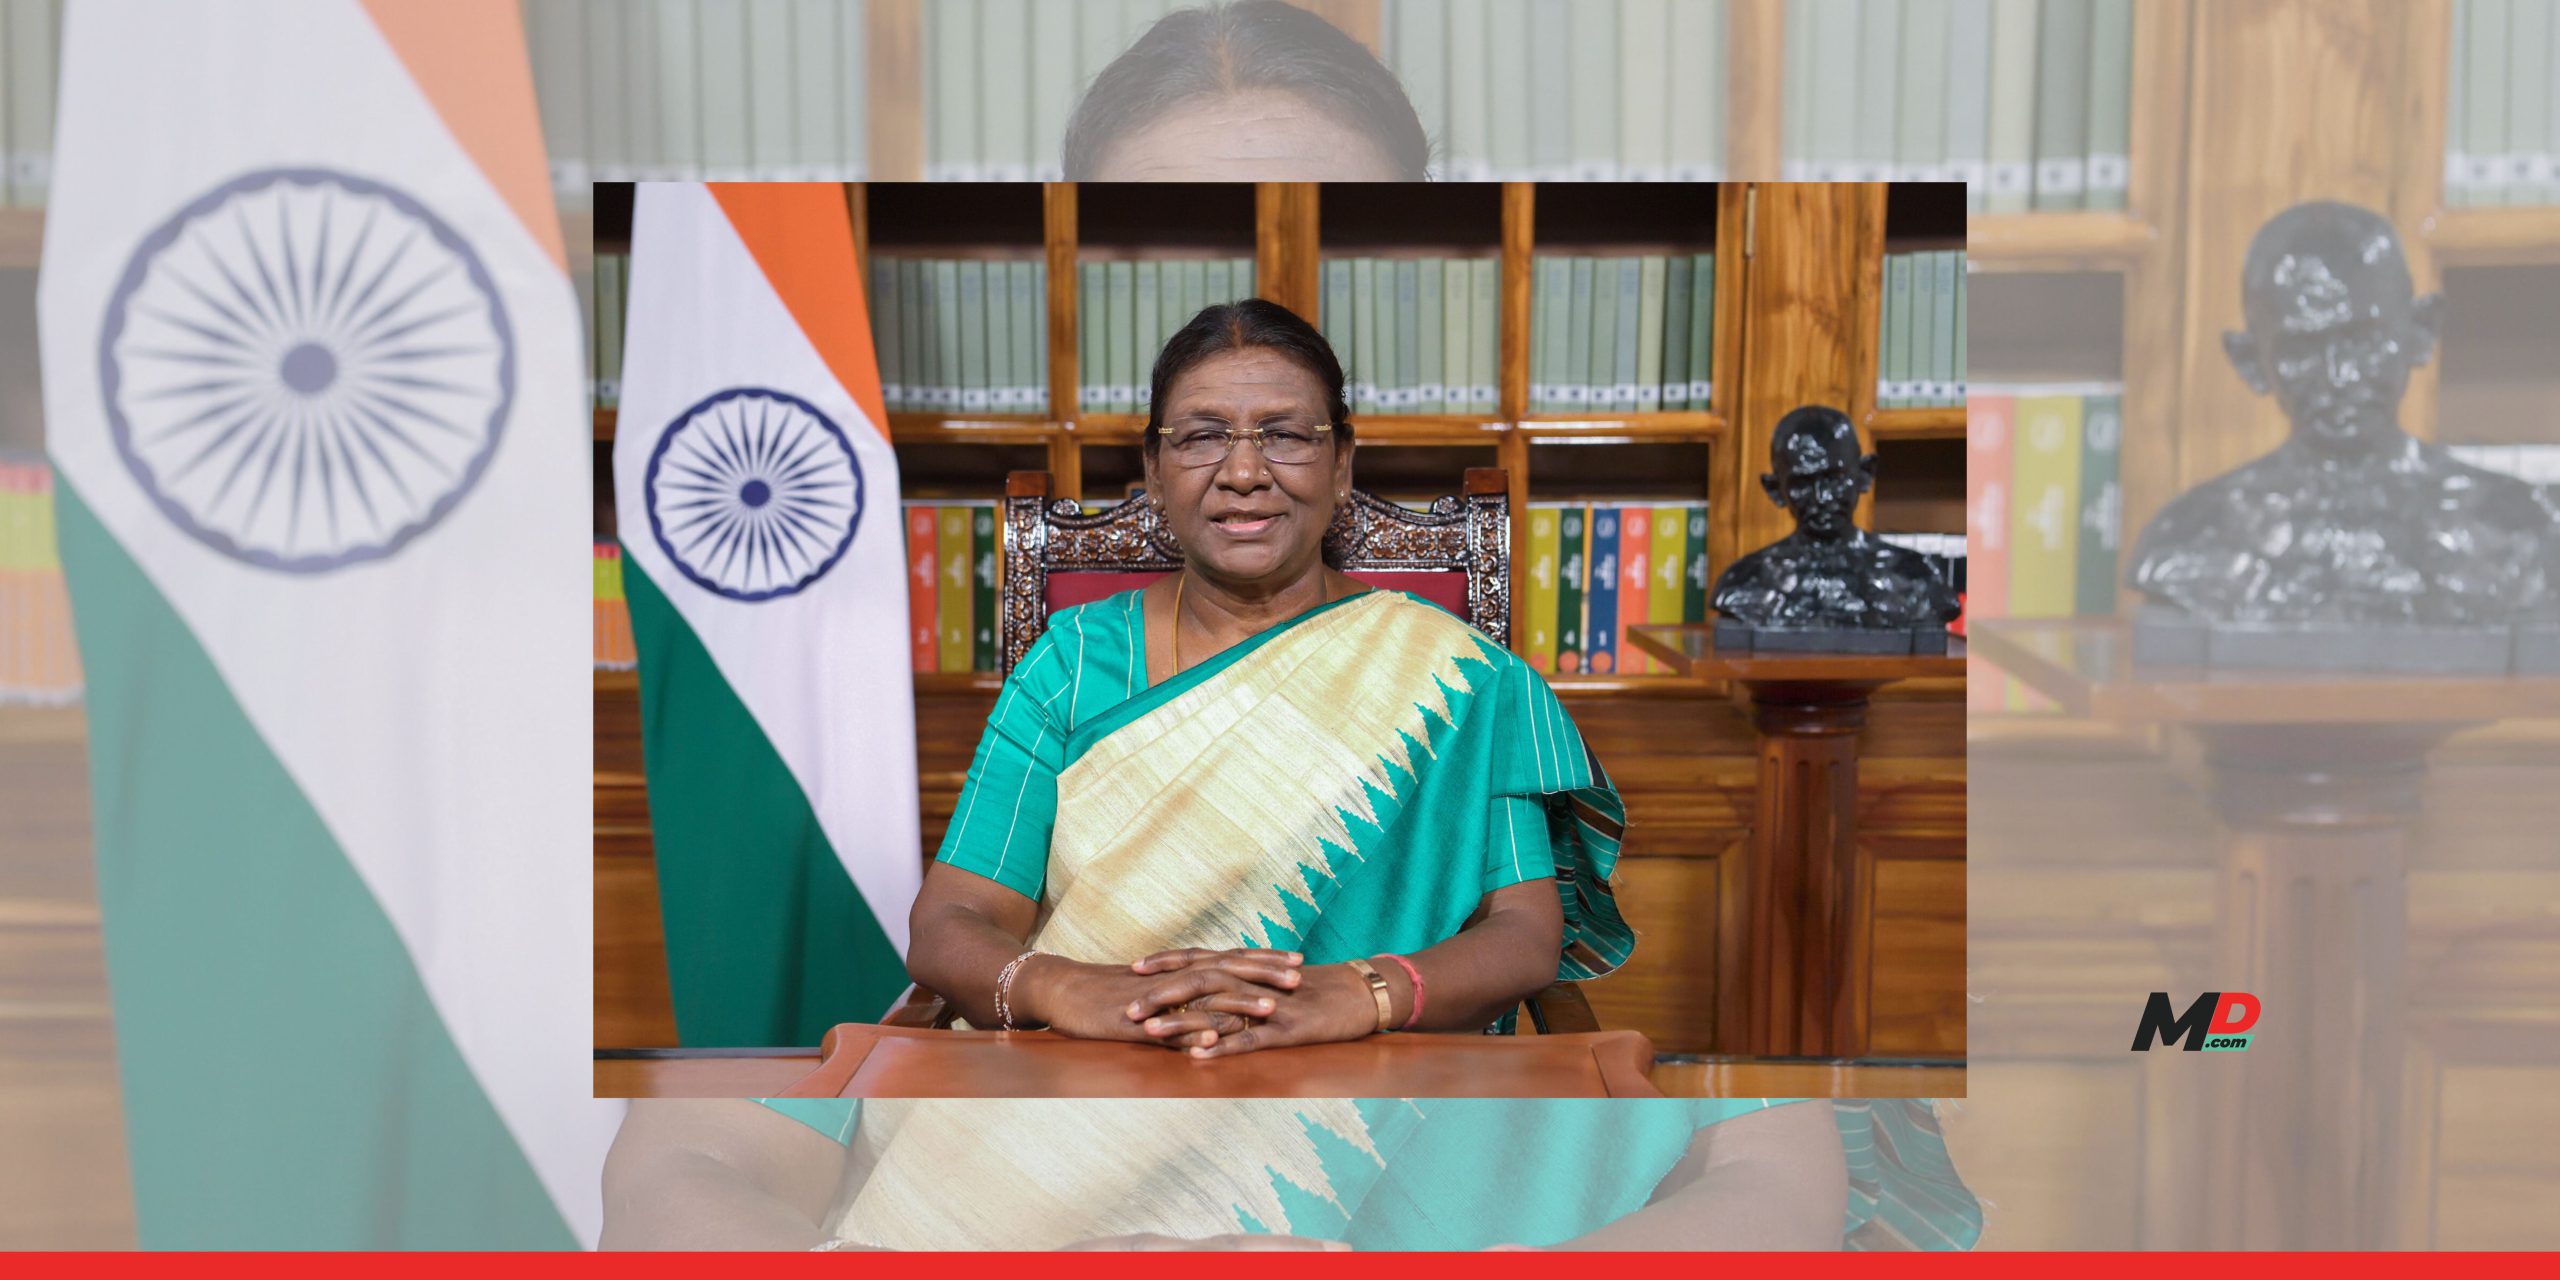 President Murmu paints a bold vision for India's future